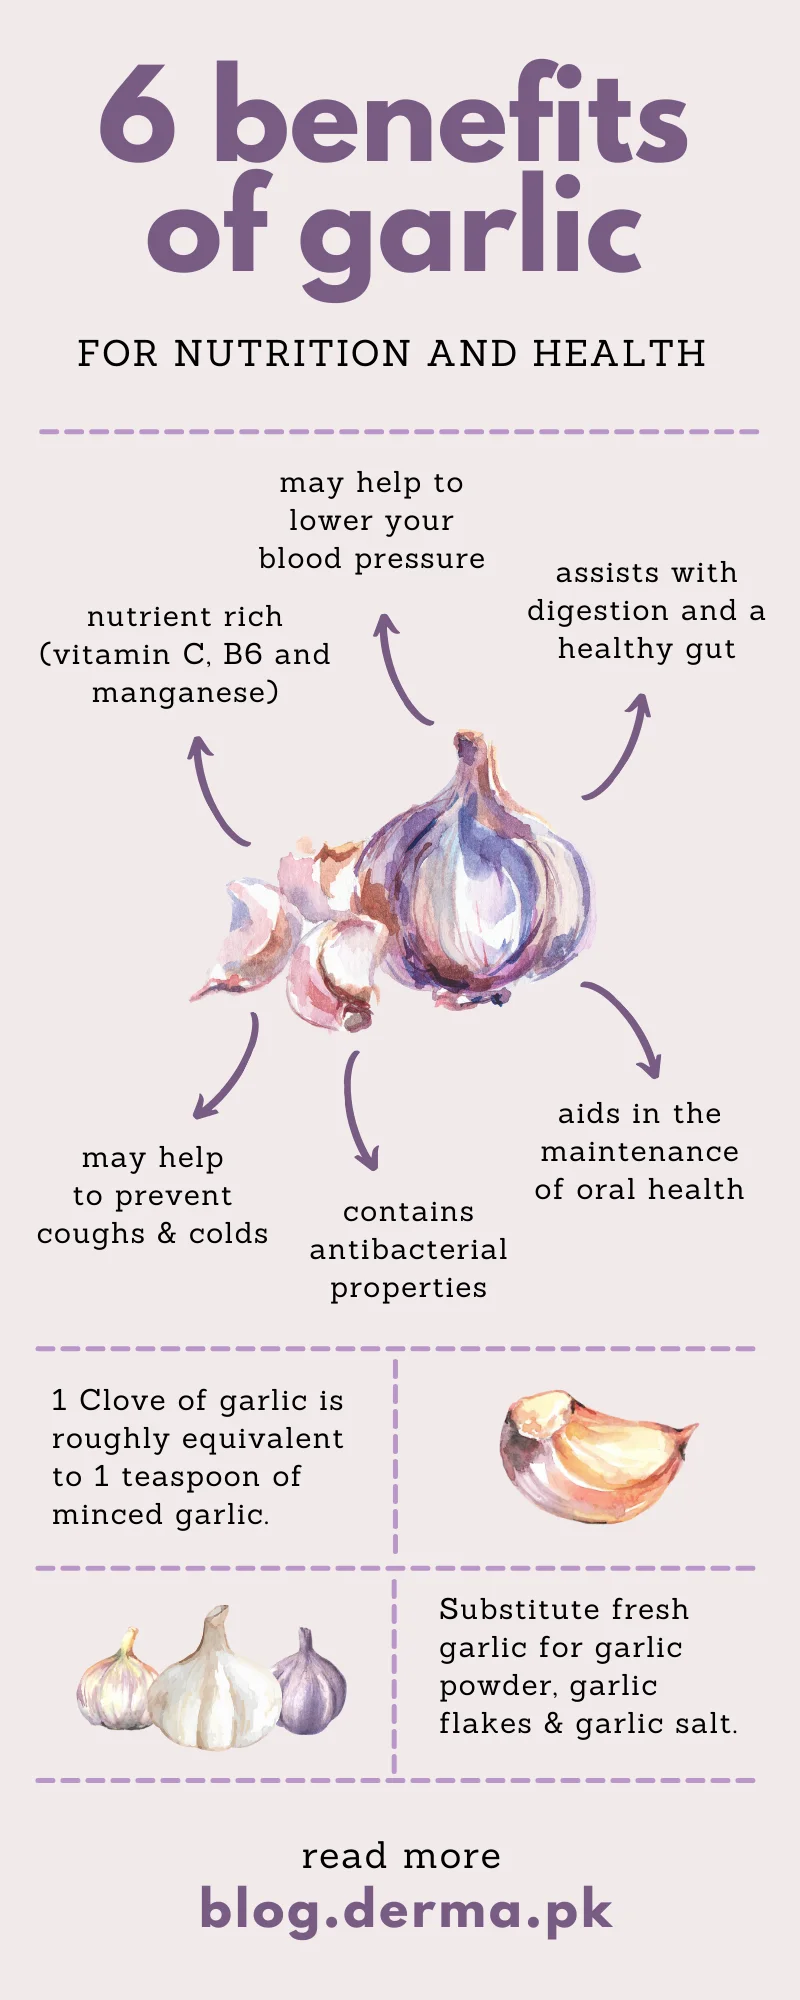 6 Benefits of Garlic for Nutrition and Health